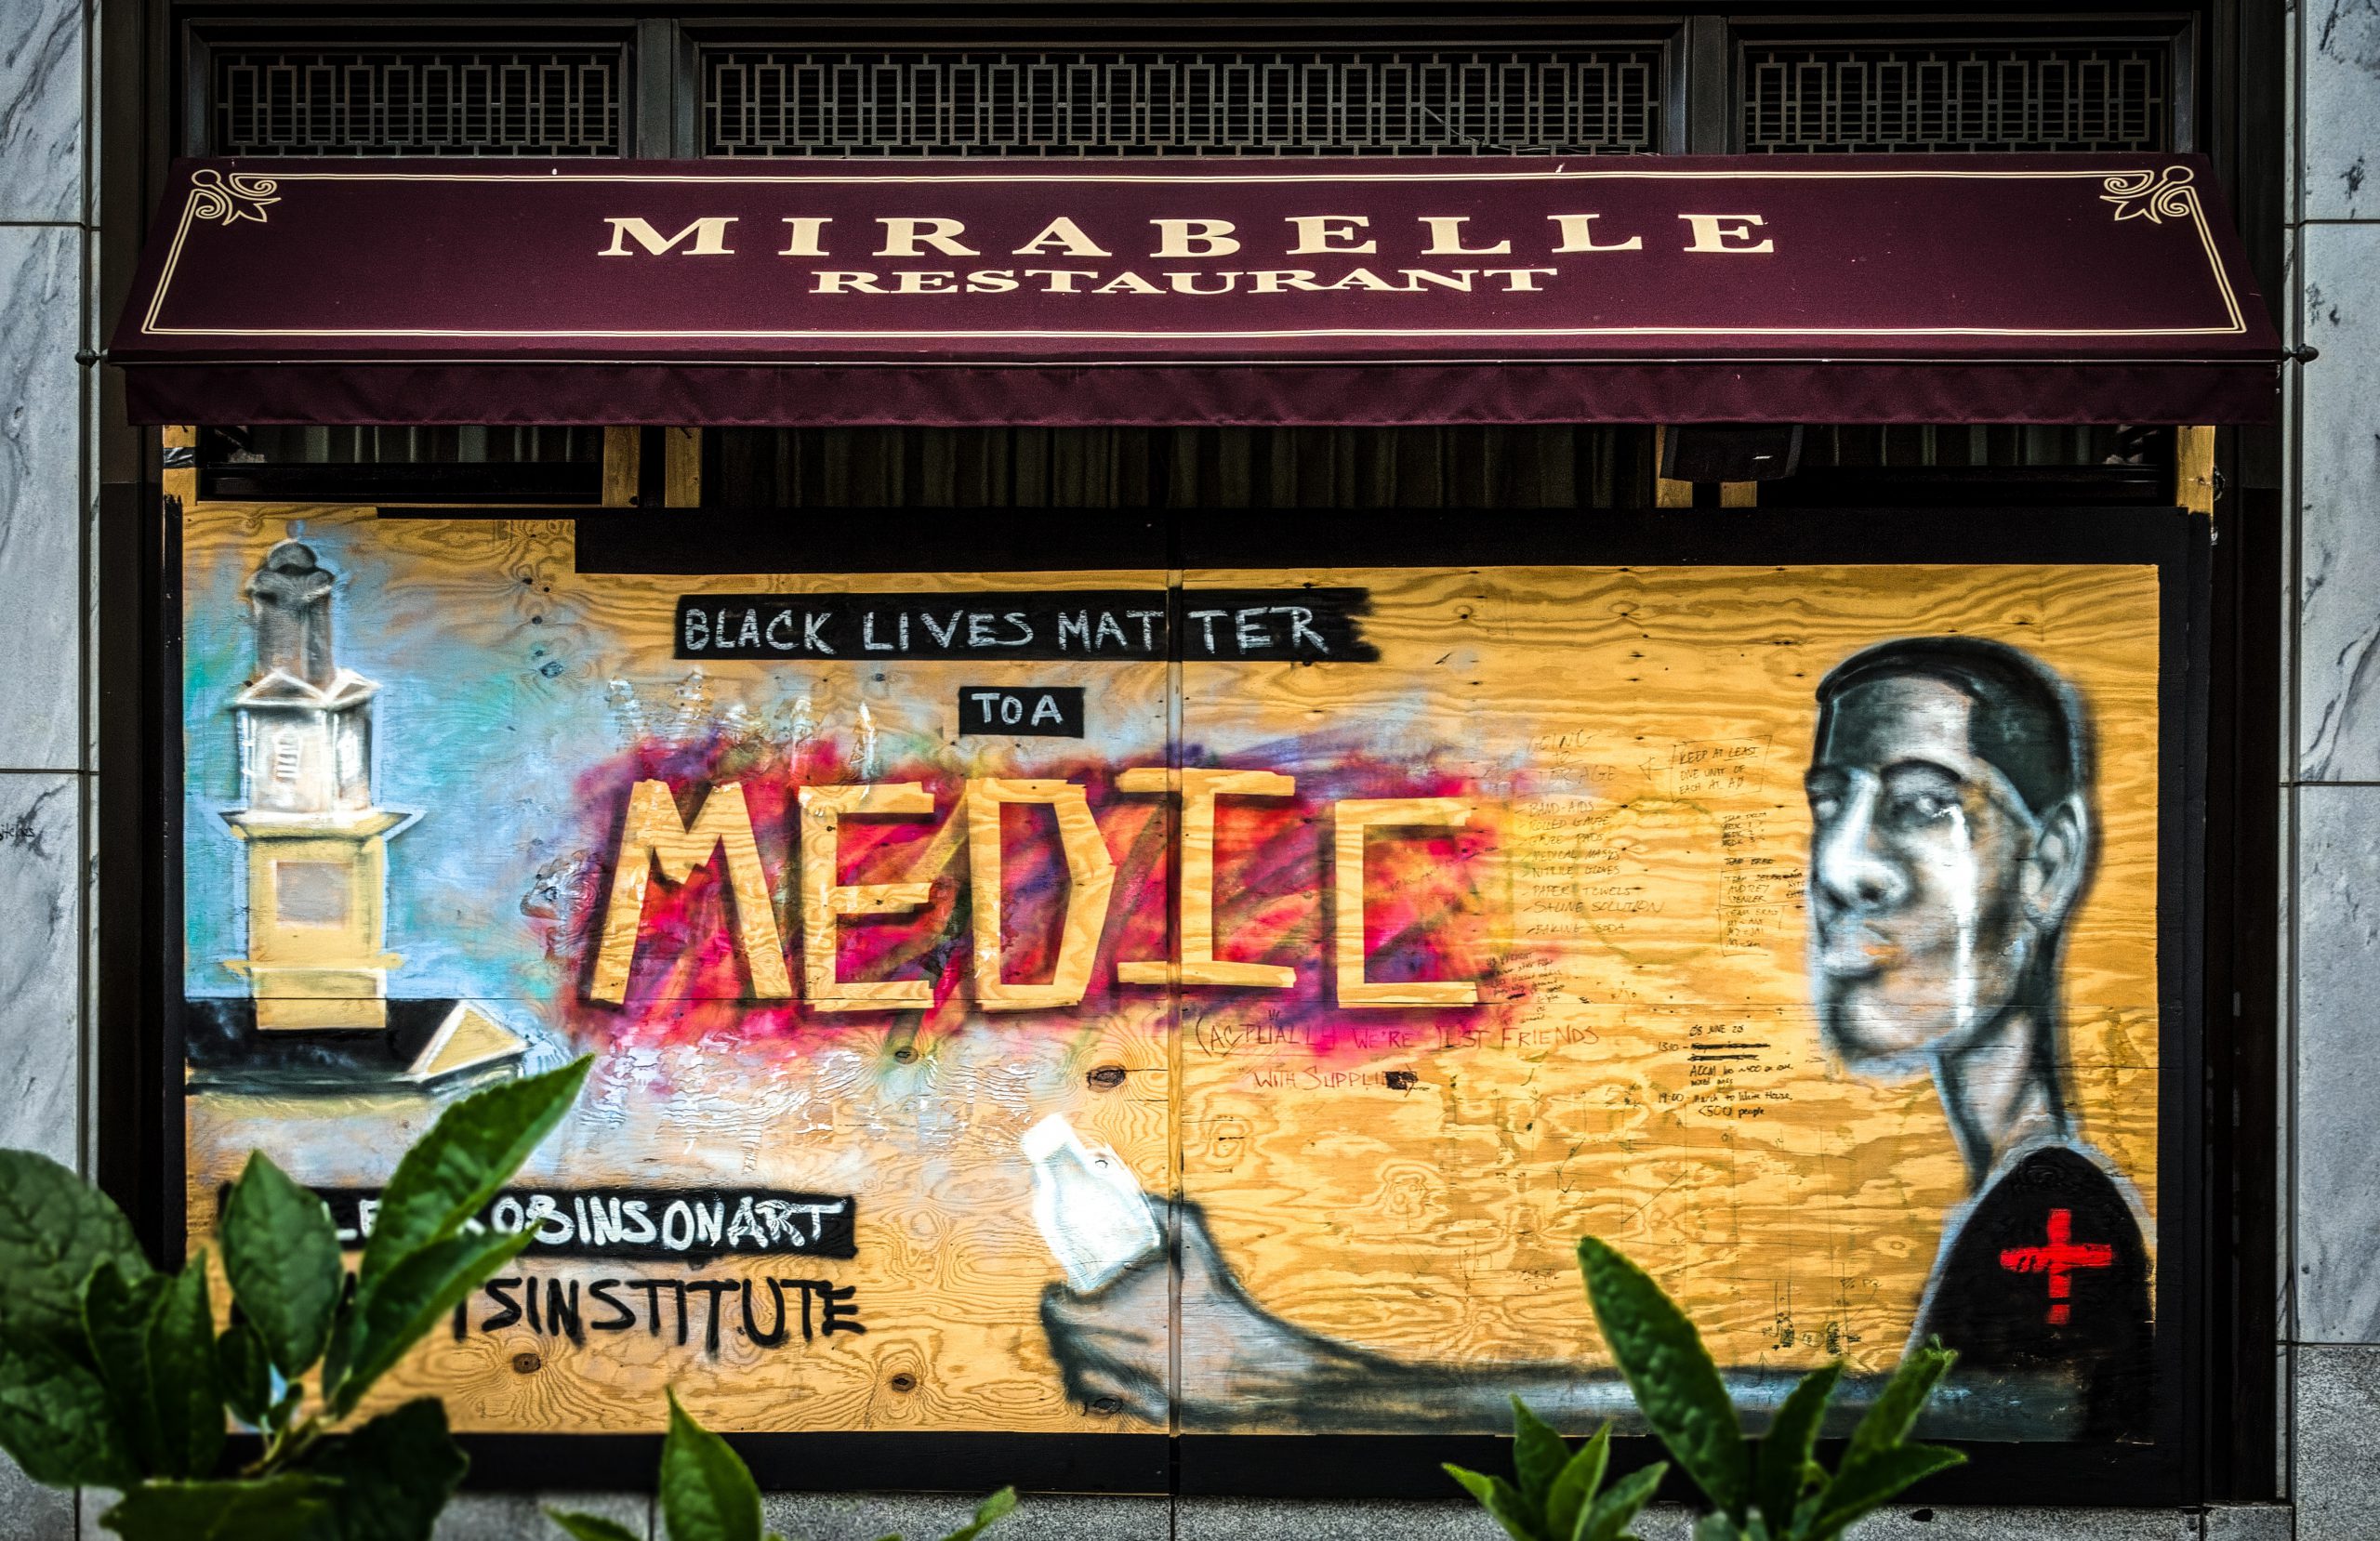 A mural in Washington DC depicts a life-saving Black Medic and the slogan Black Lives Matter.